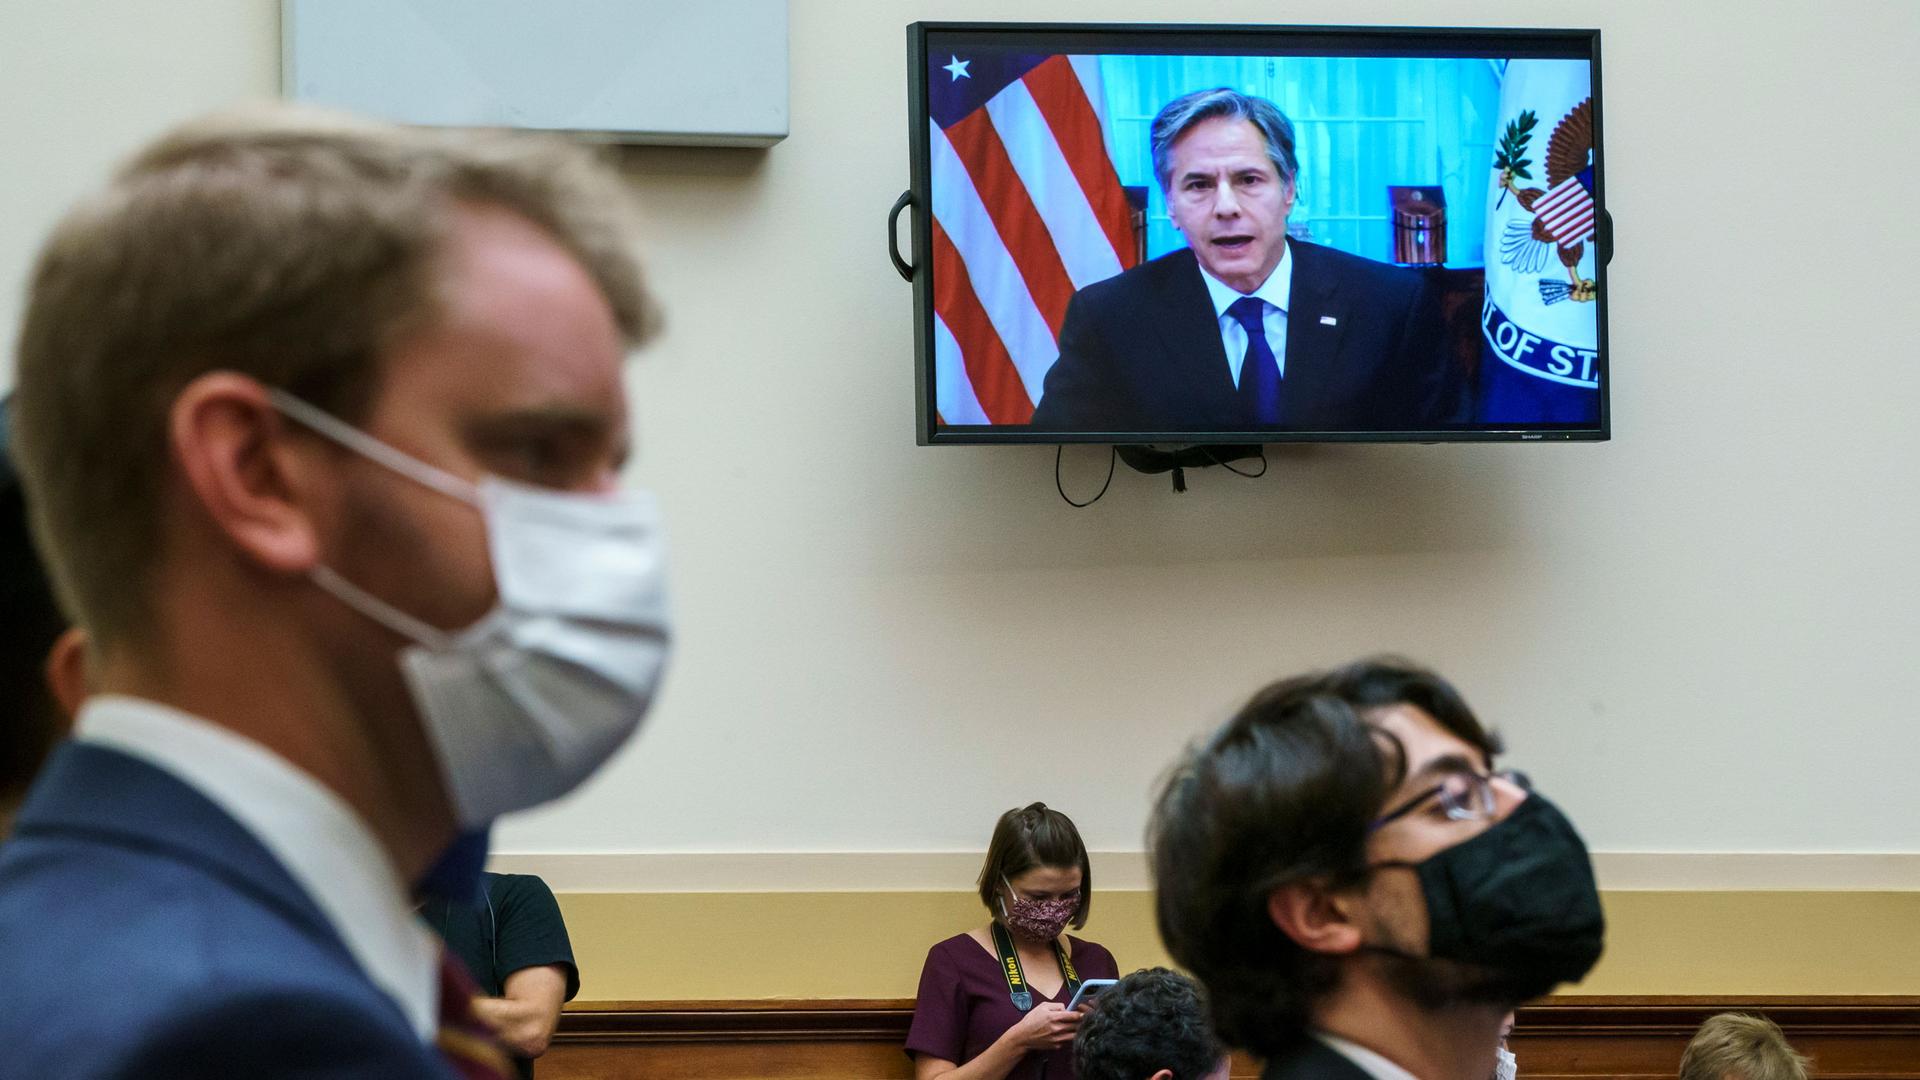 US Secretary of State Antony Blinken is shown on a TV hanging on the wall in the distance with several people wearing face masks stand in the nearground.